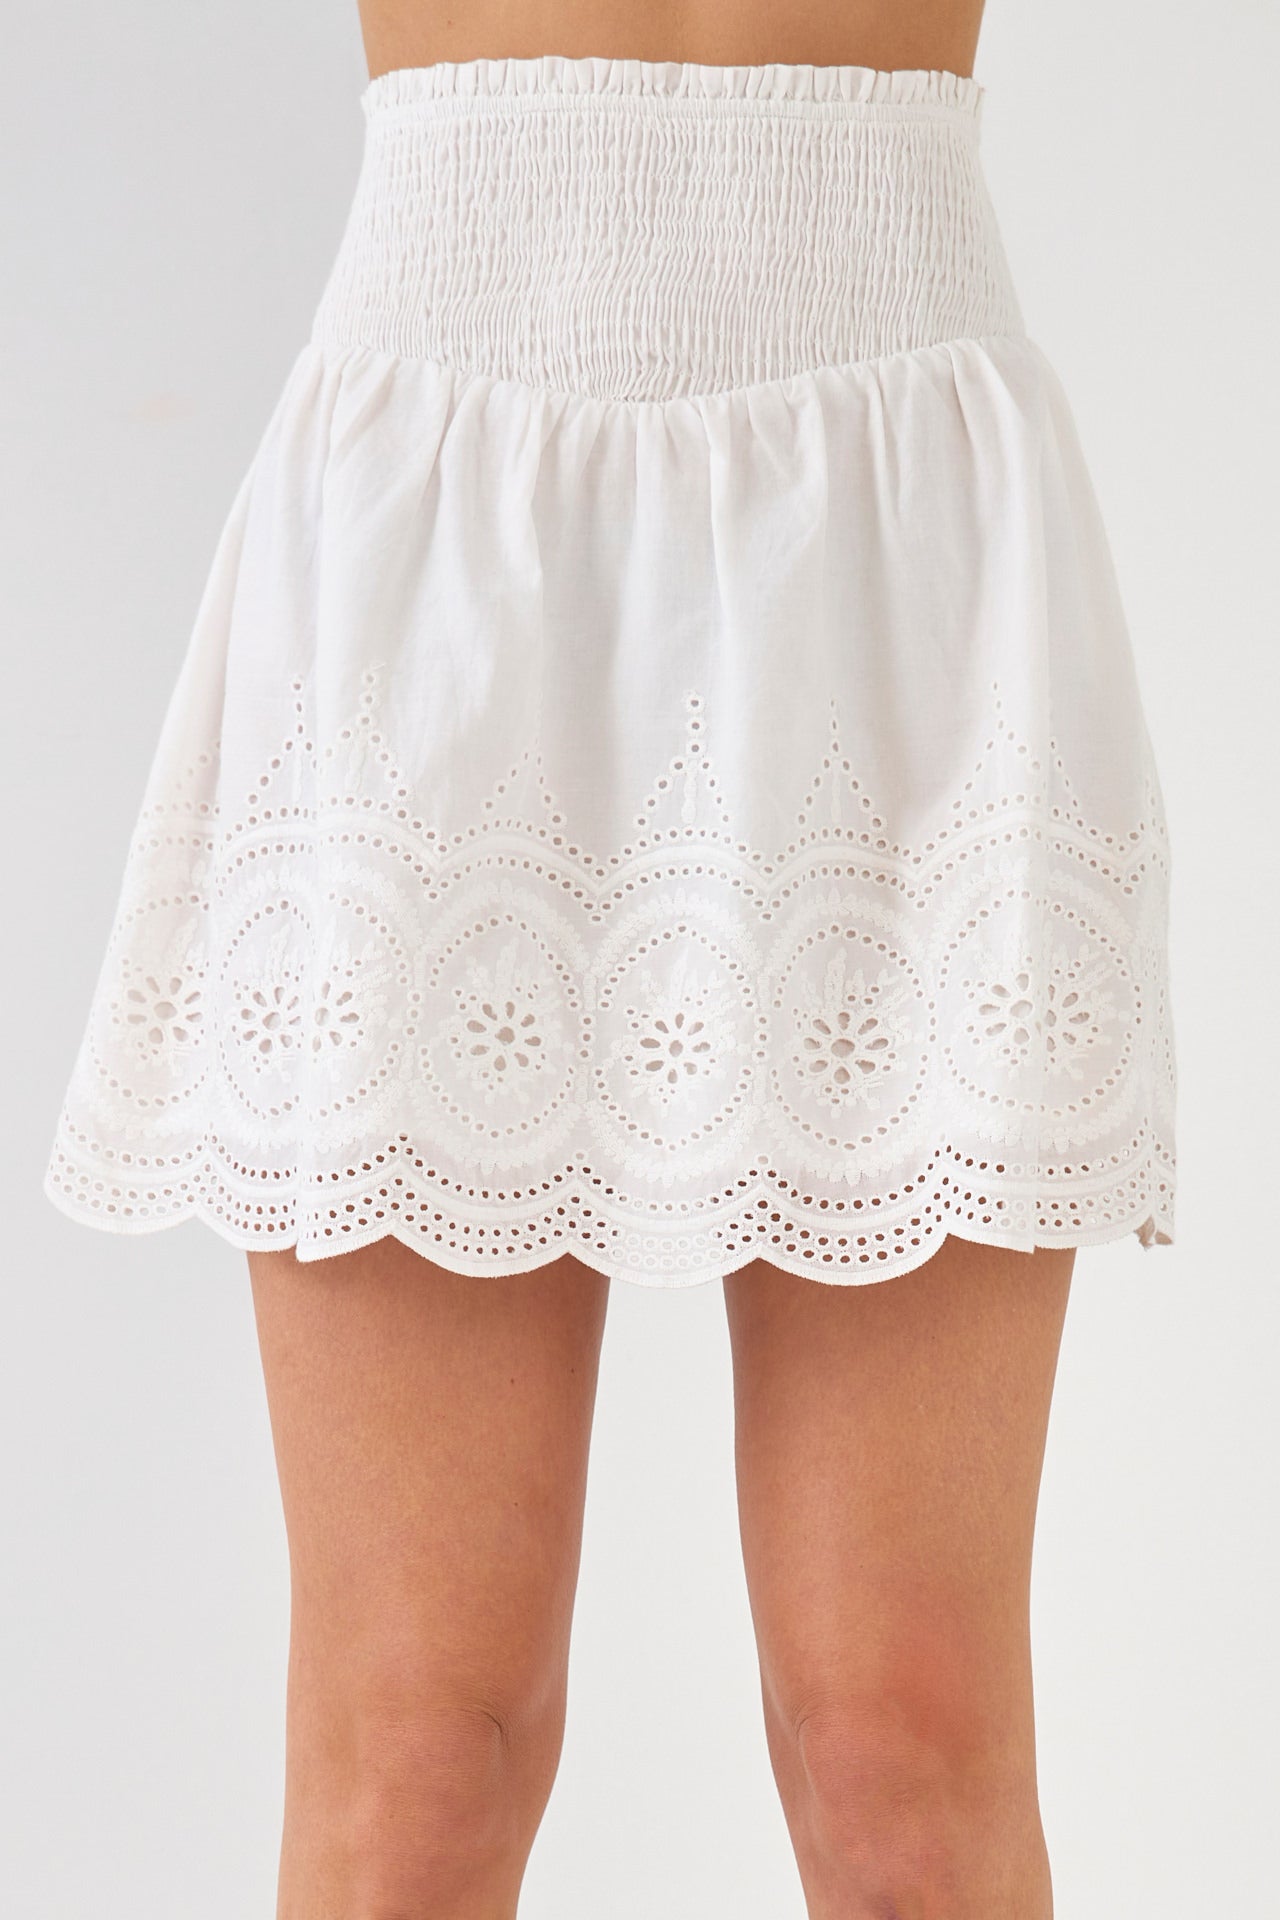 FREE THE ROSES - Smocked Waist Lace Skirt - SKIRTS available at Objectrare